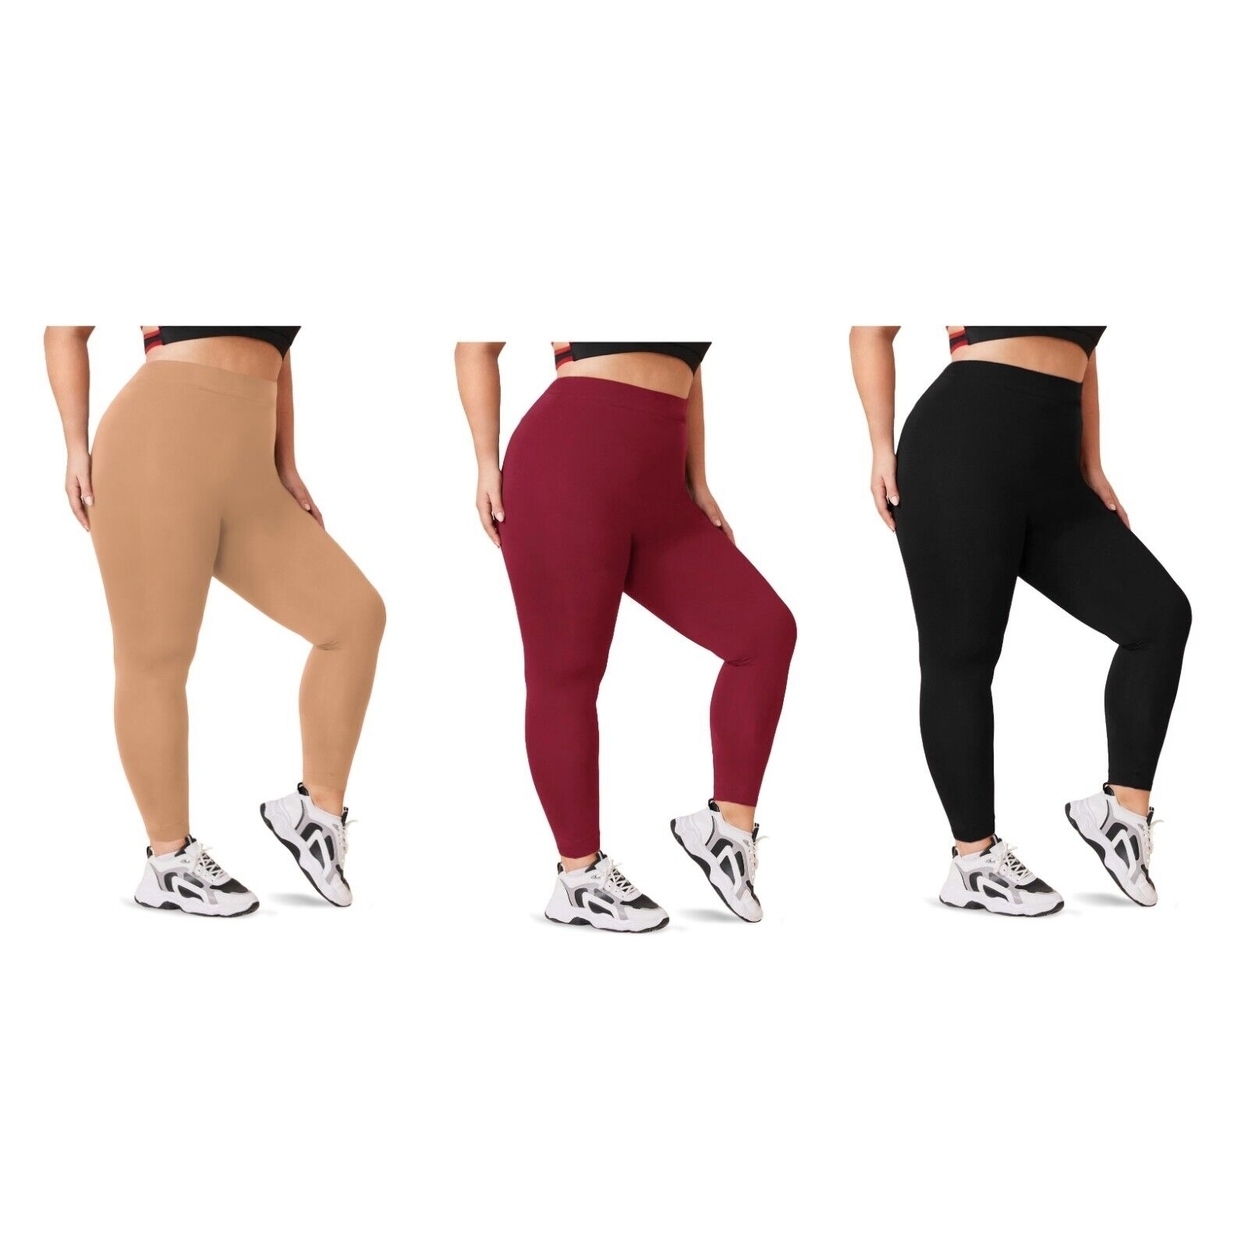 2-Pack: Women's Casual Ultra-Soft Smooth High Waisted Athletic Active Yoga Leggings Plus Size Available - Beige & Black, 2x